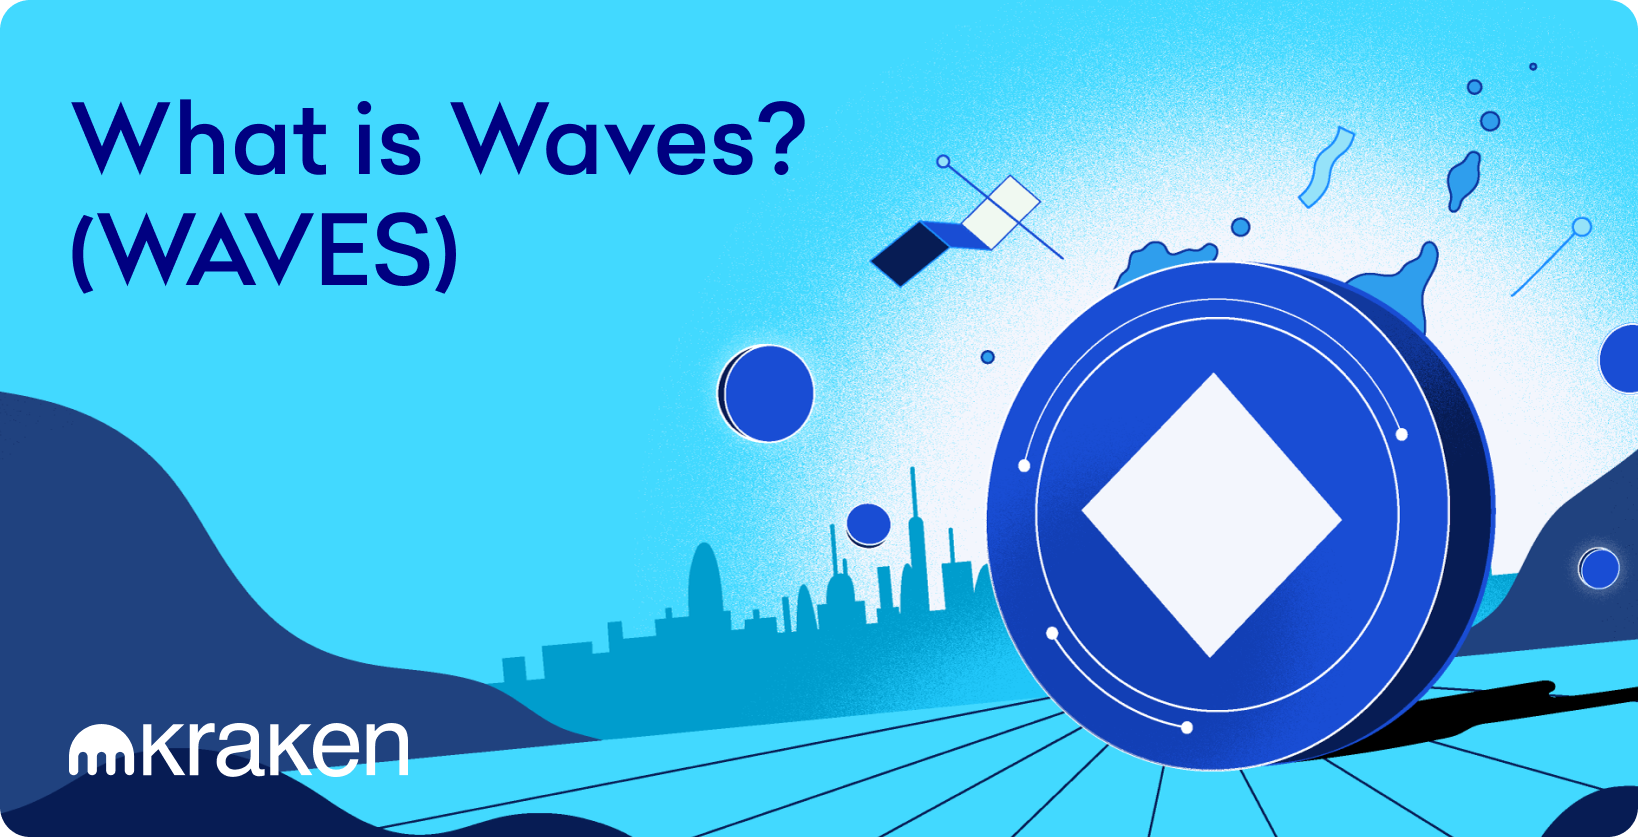 WAVES - WAVES/USDT quote - Financial instrument overview